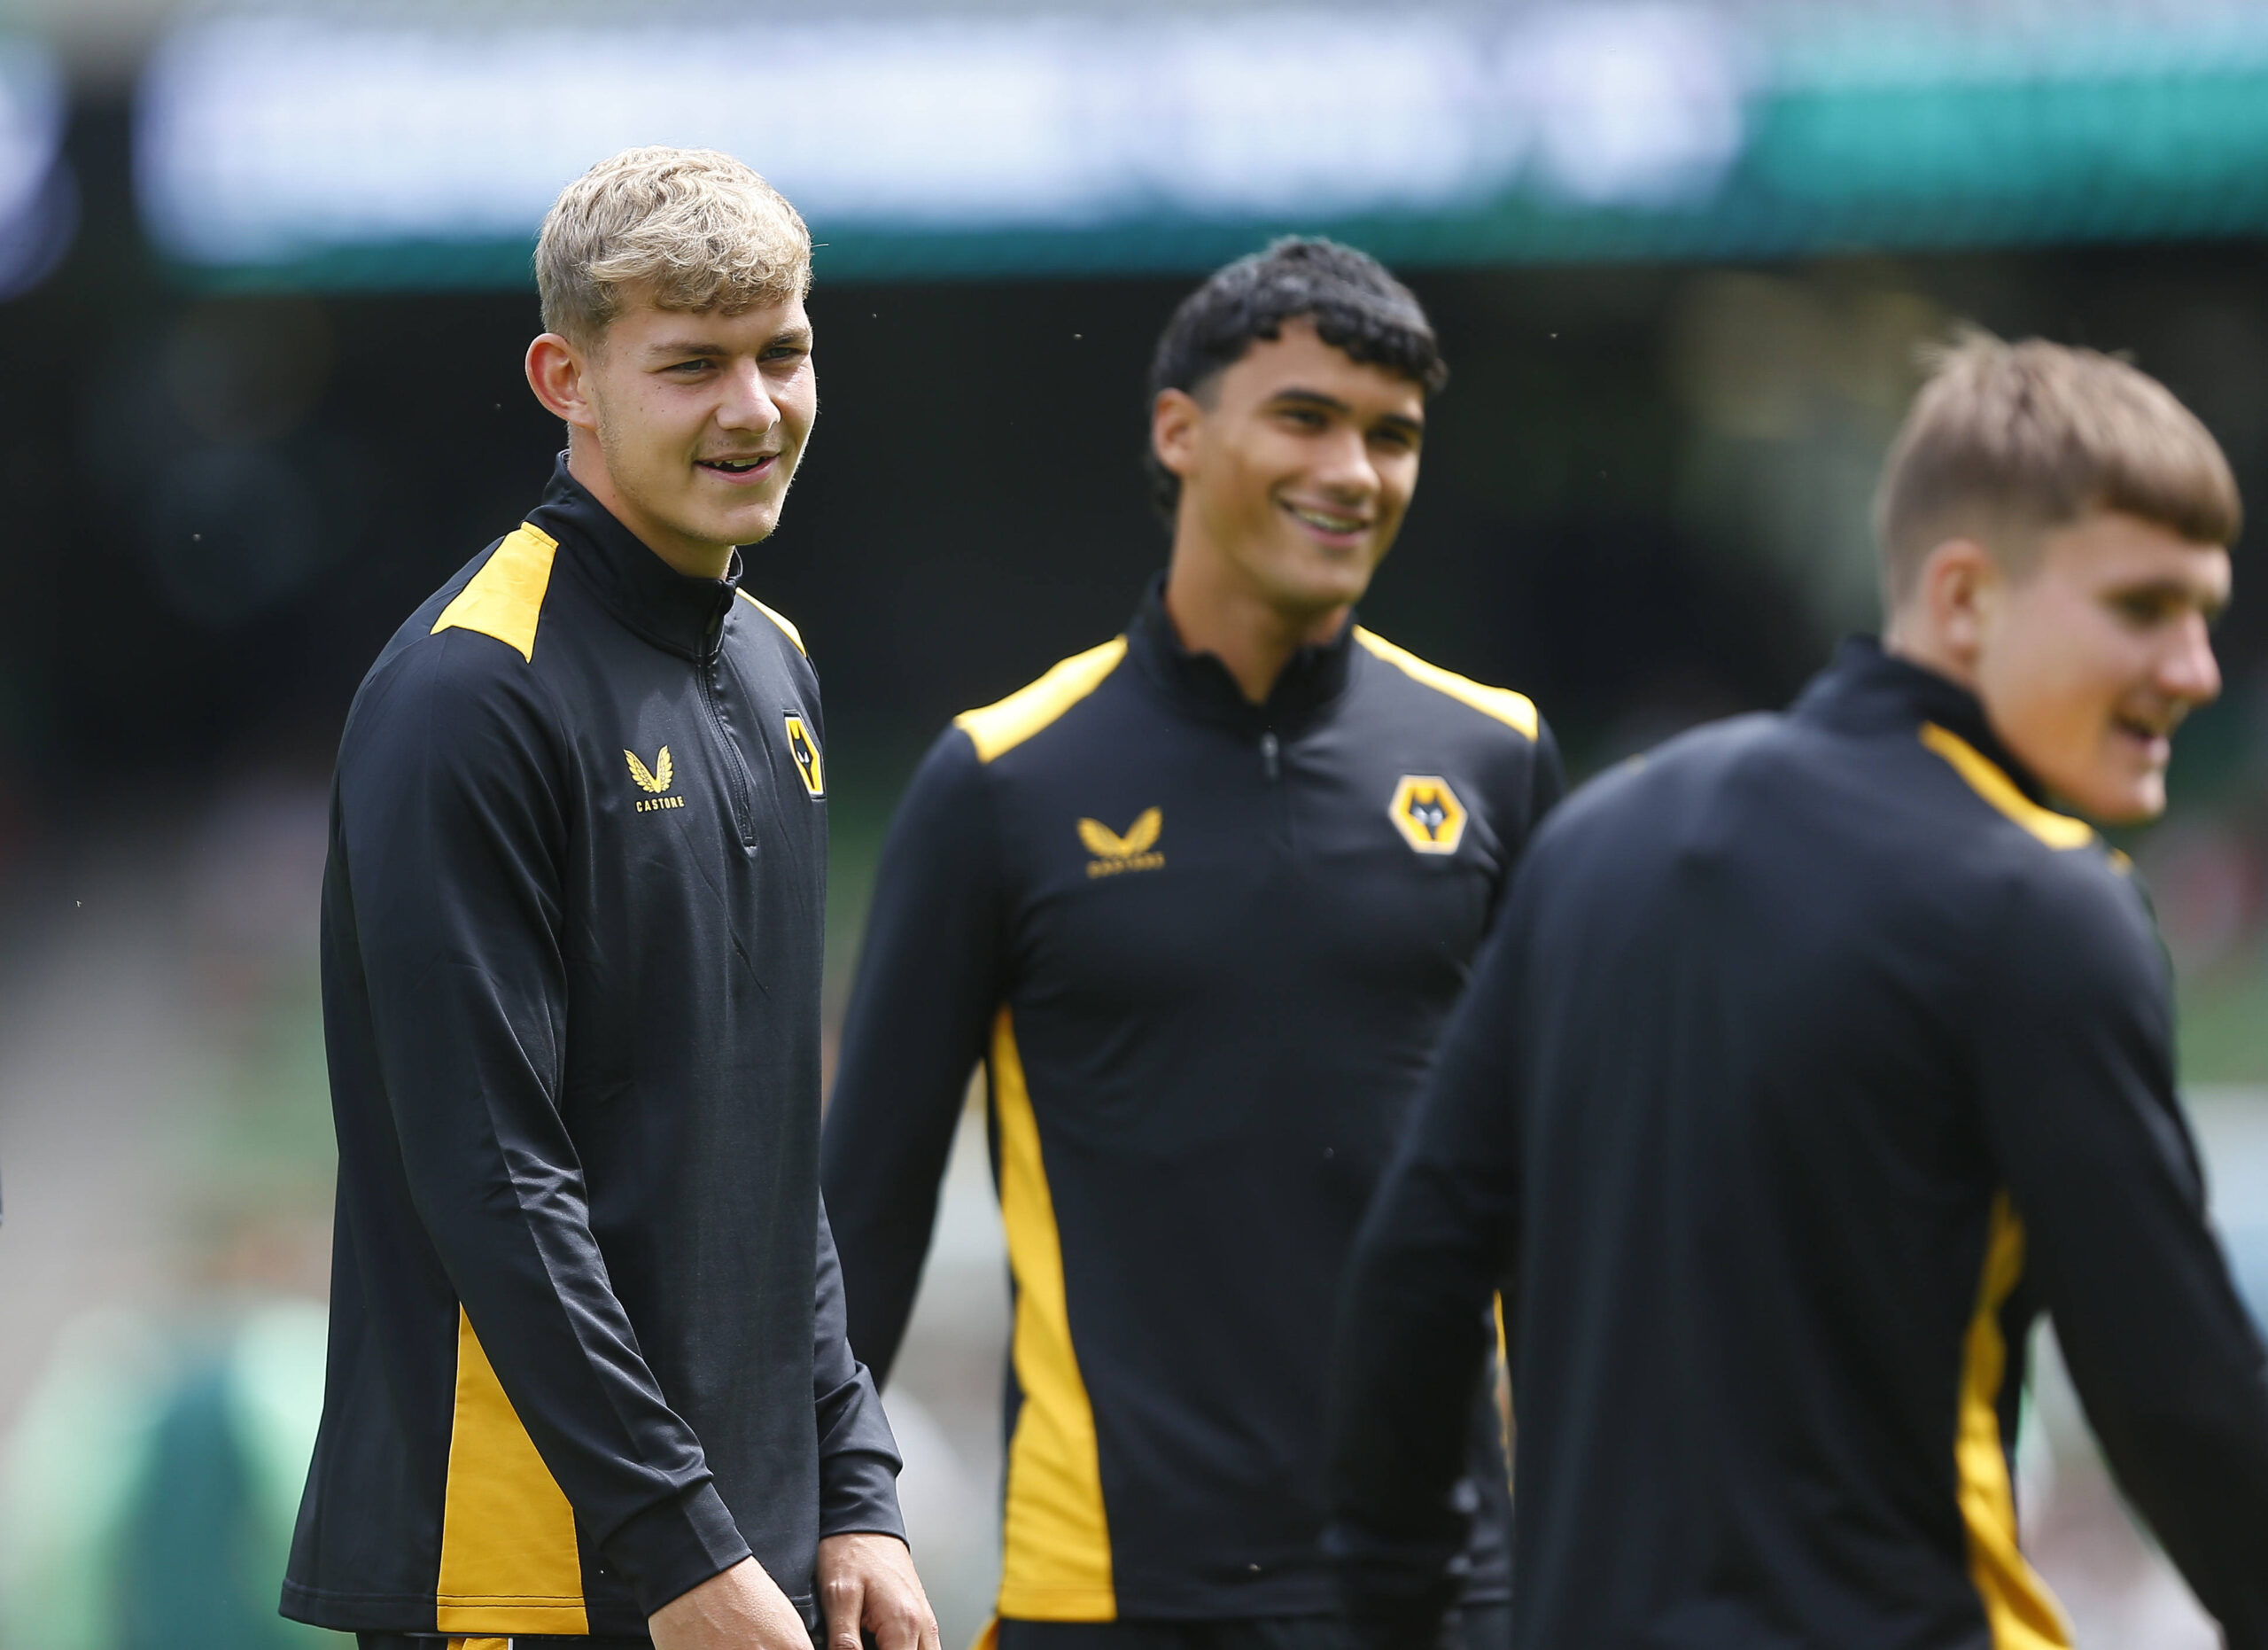 Wolves players warm up before friendly